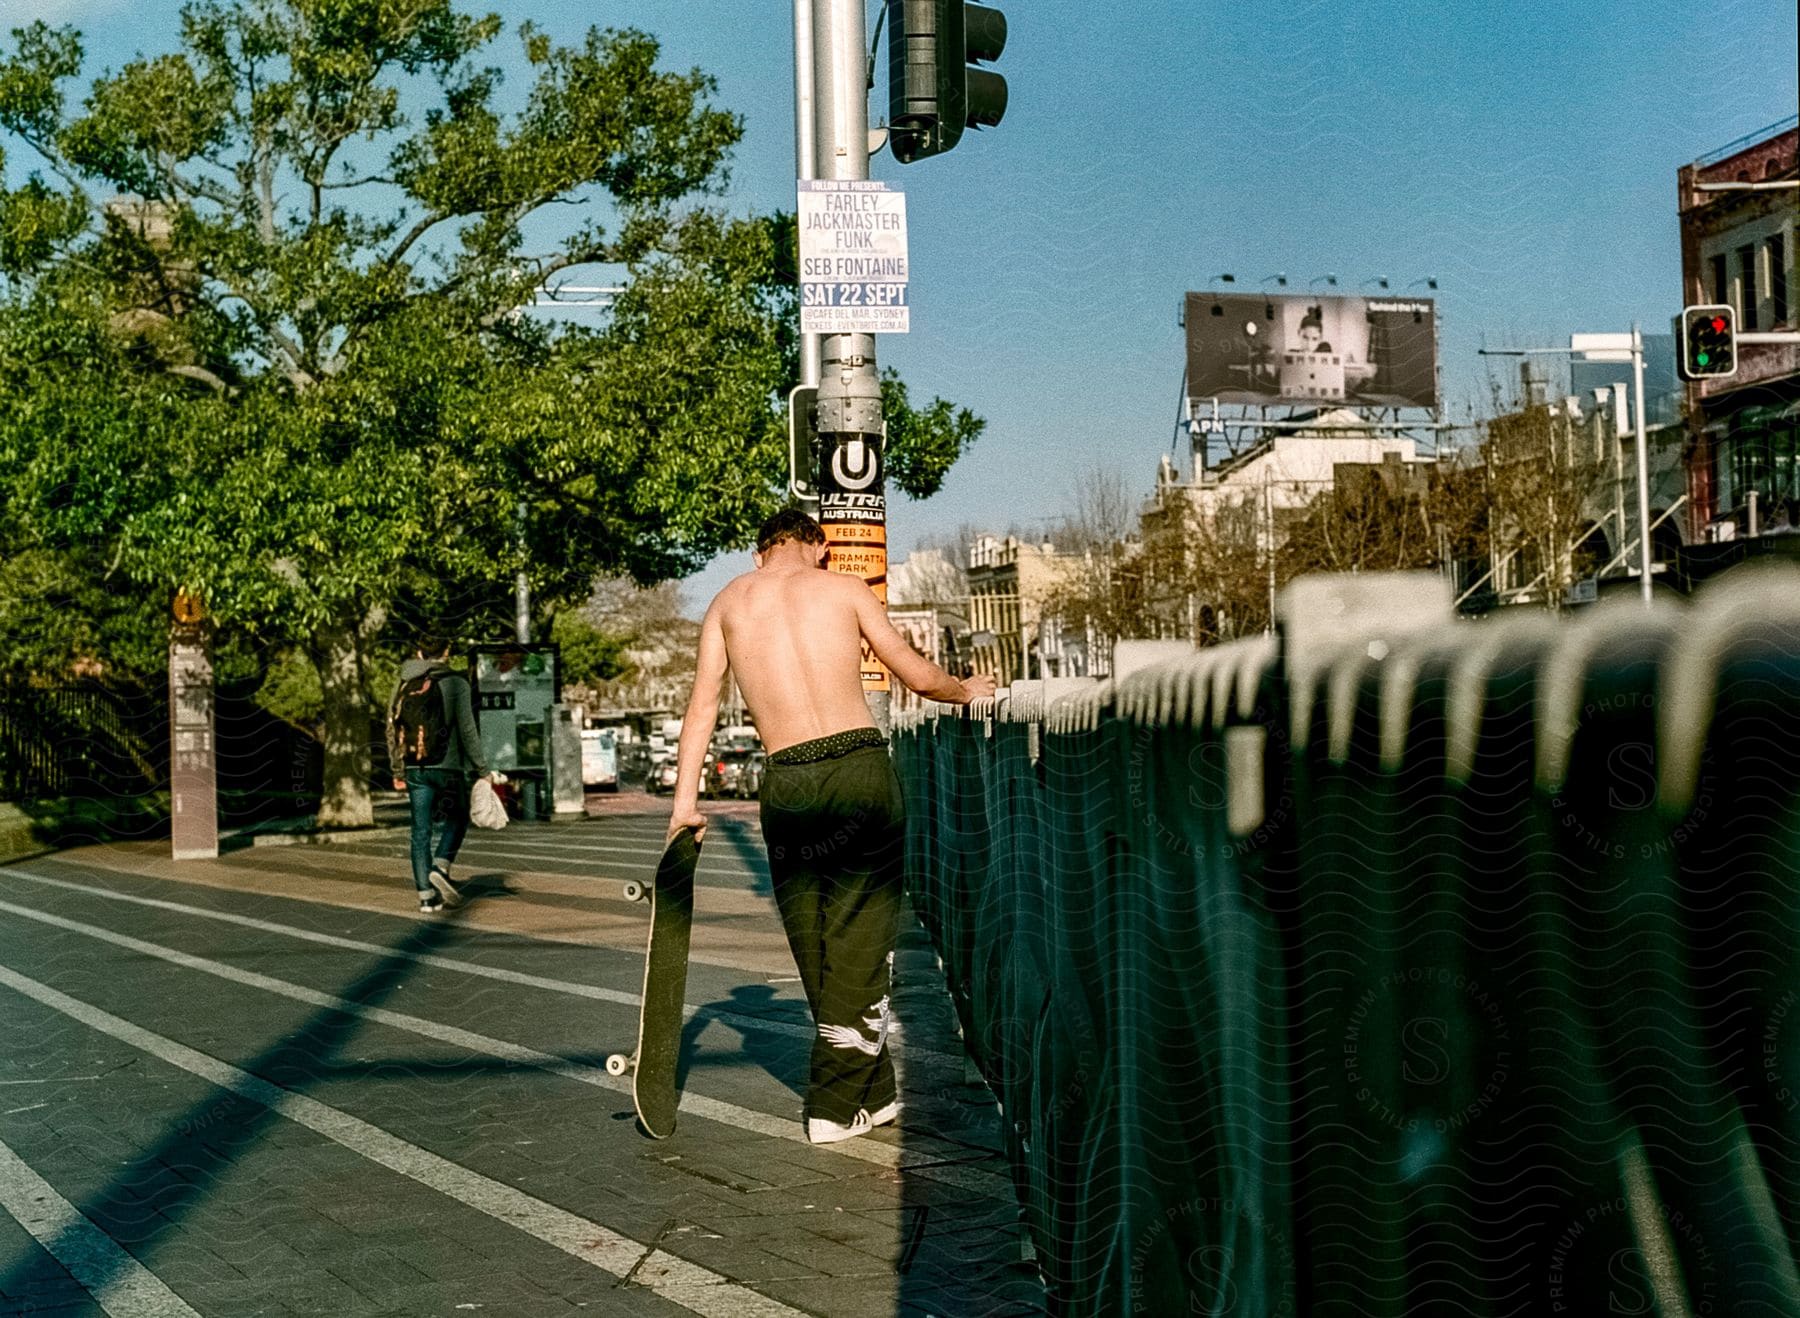 A shirtless man with a skateboard walks on a crosswalk by a traffic light and a fence in a suburban area.